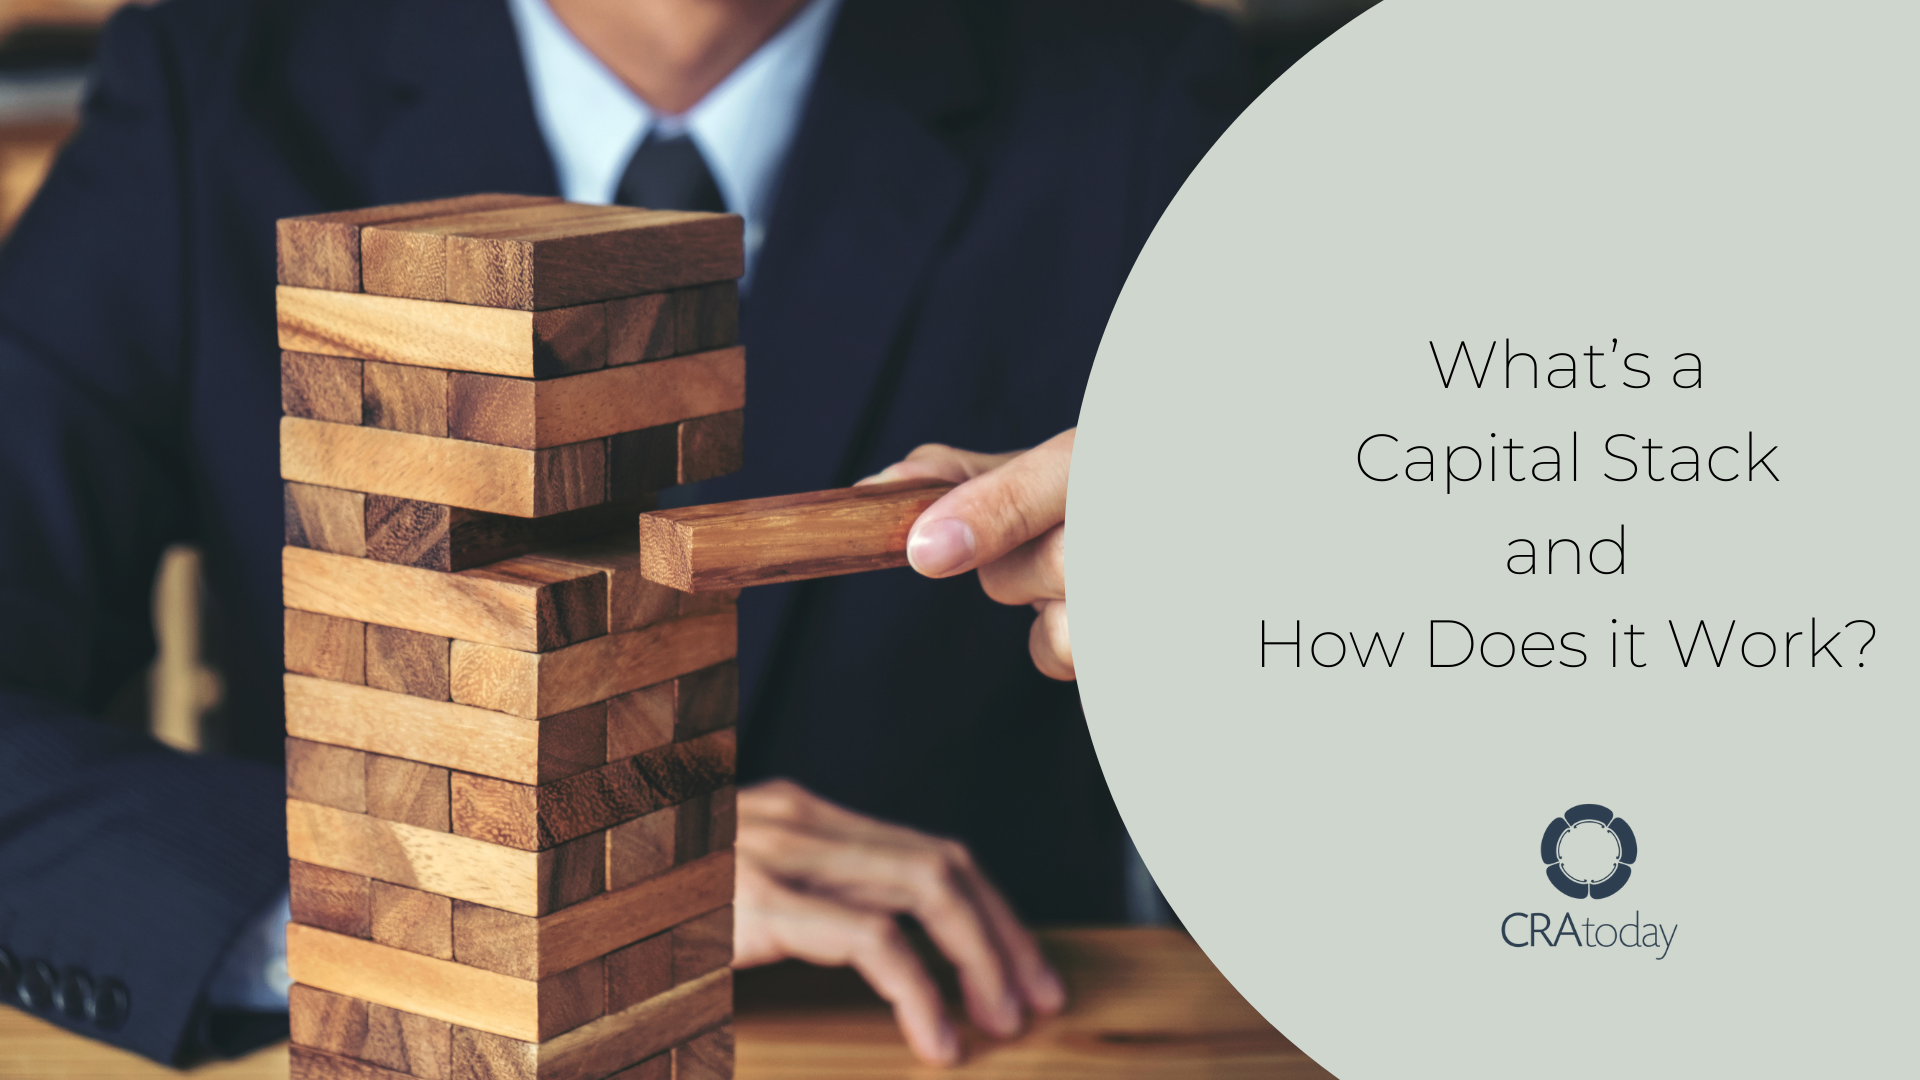 What's a Capital Stack and How does it work?